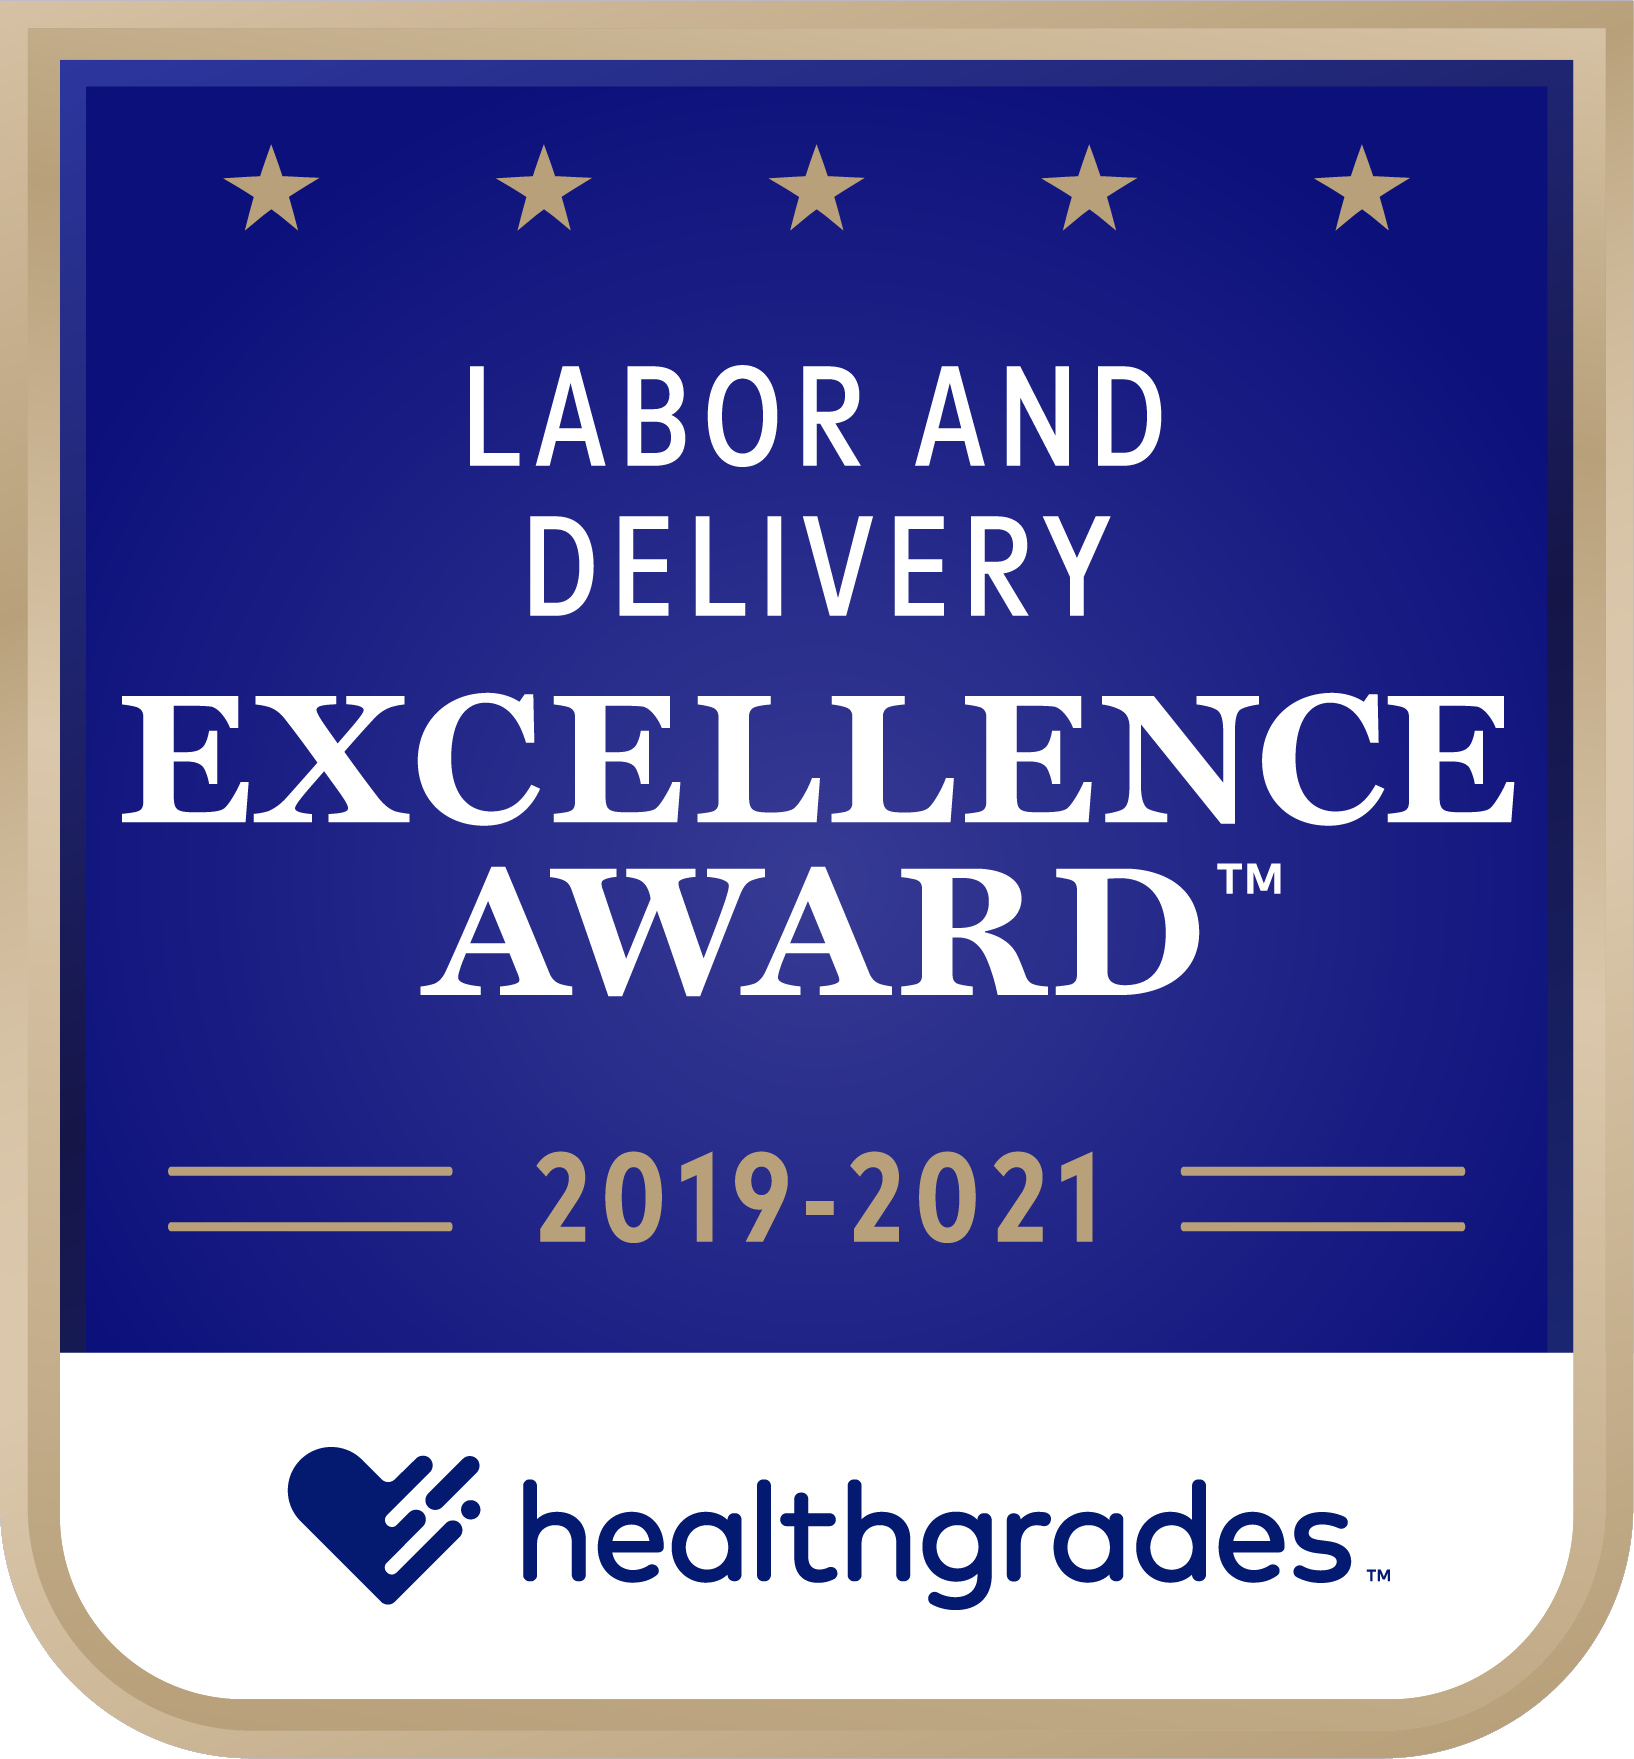 Recipient of the Healthgrades Labor and Delivery Excellence Award™ for 3 Years in a Row (2019-2021)